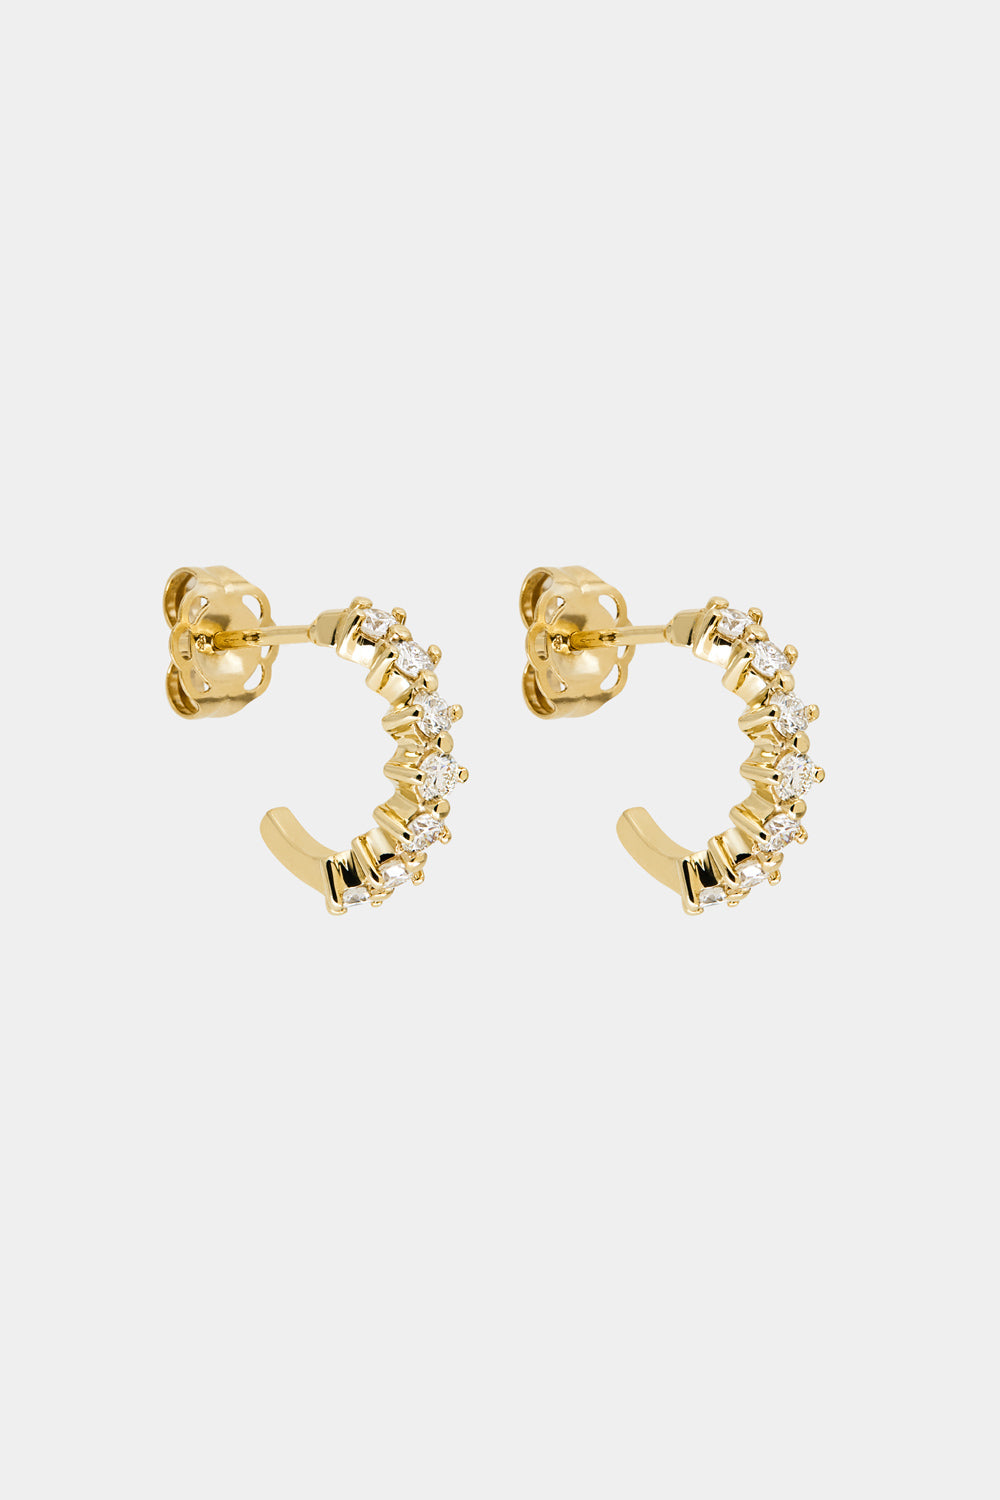 Mini Buttercup Diamond Hoops | Yellow Gold, More Options Available